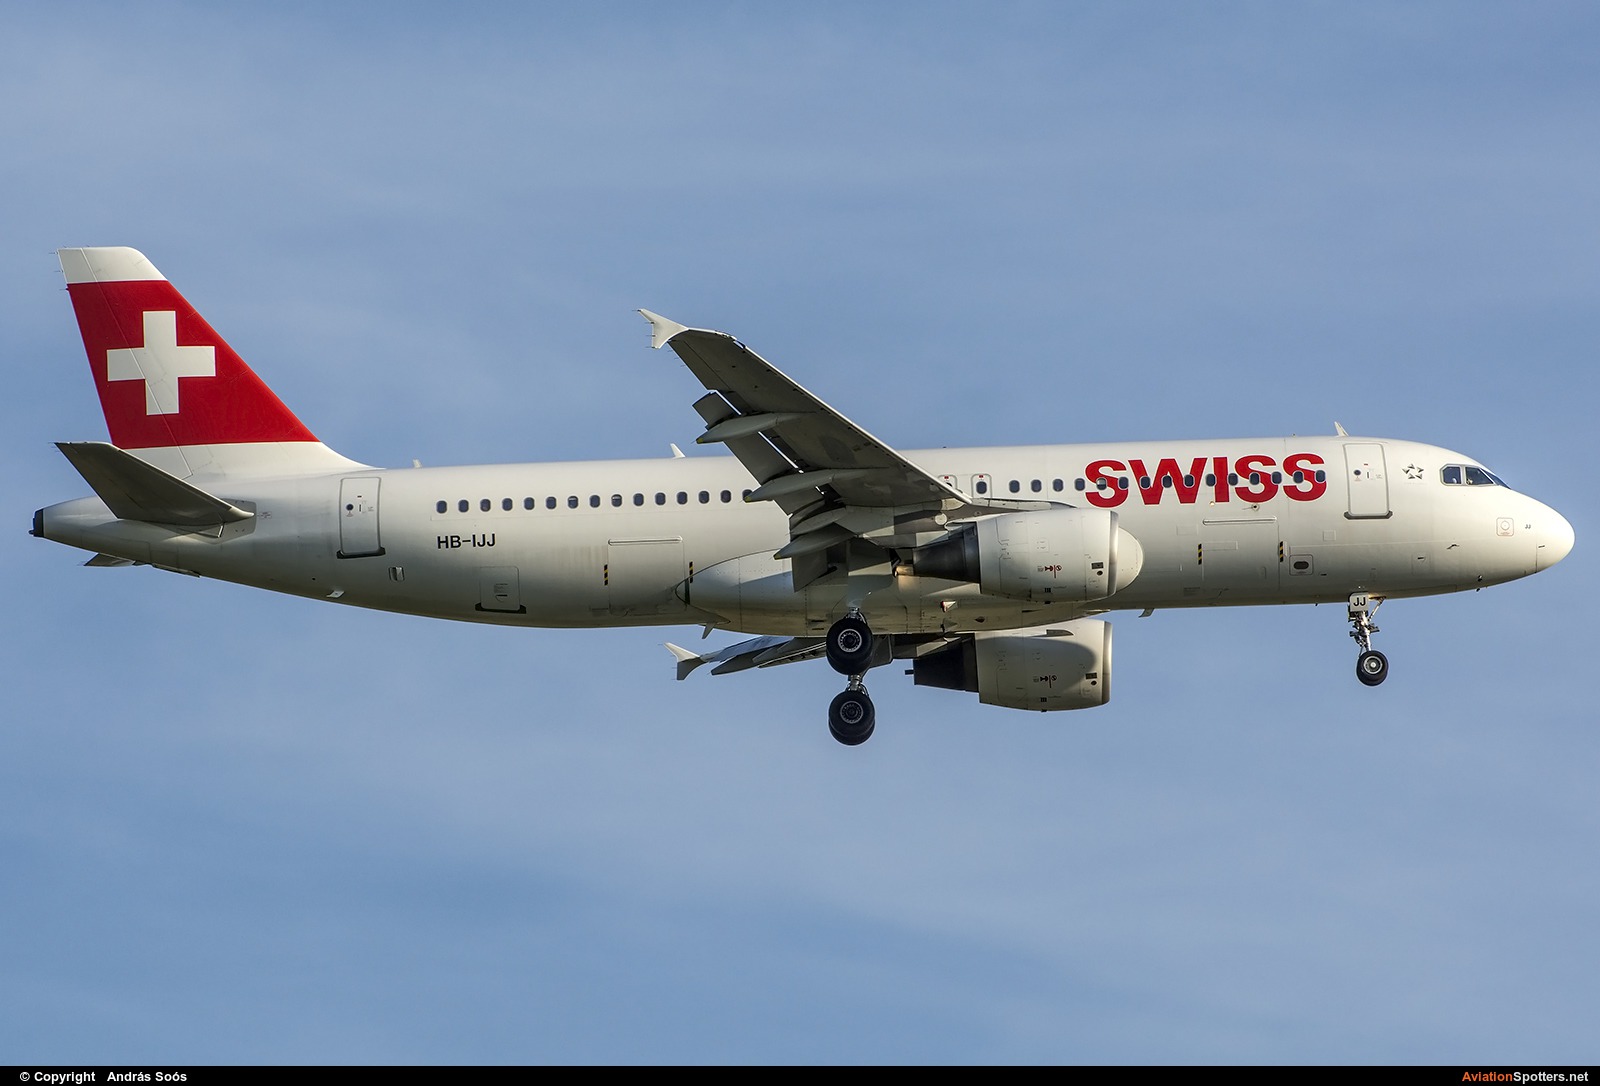 Swiss Airlines  -  A320-214  (HB-IJJ) By András Soós (sas1965)